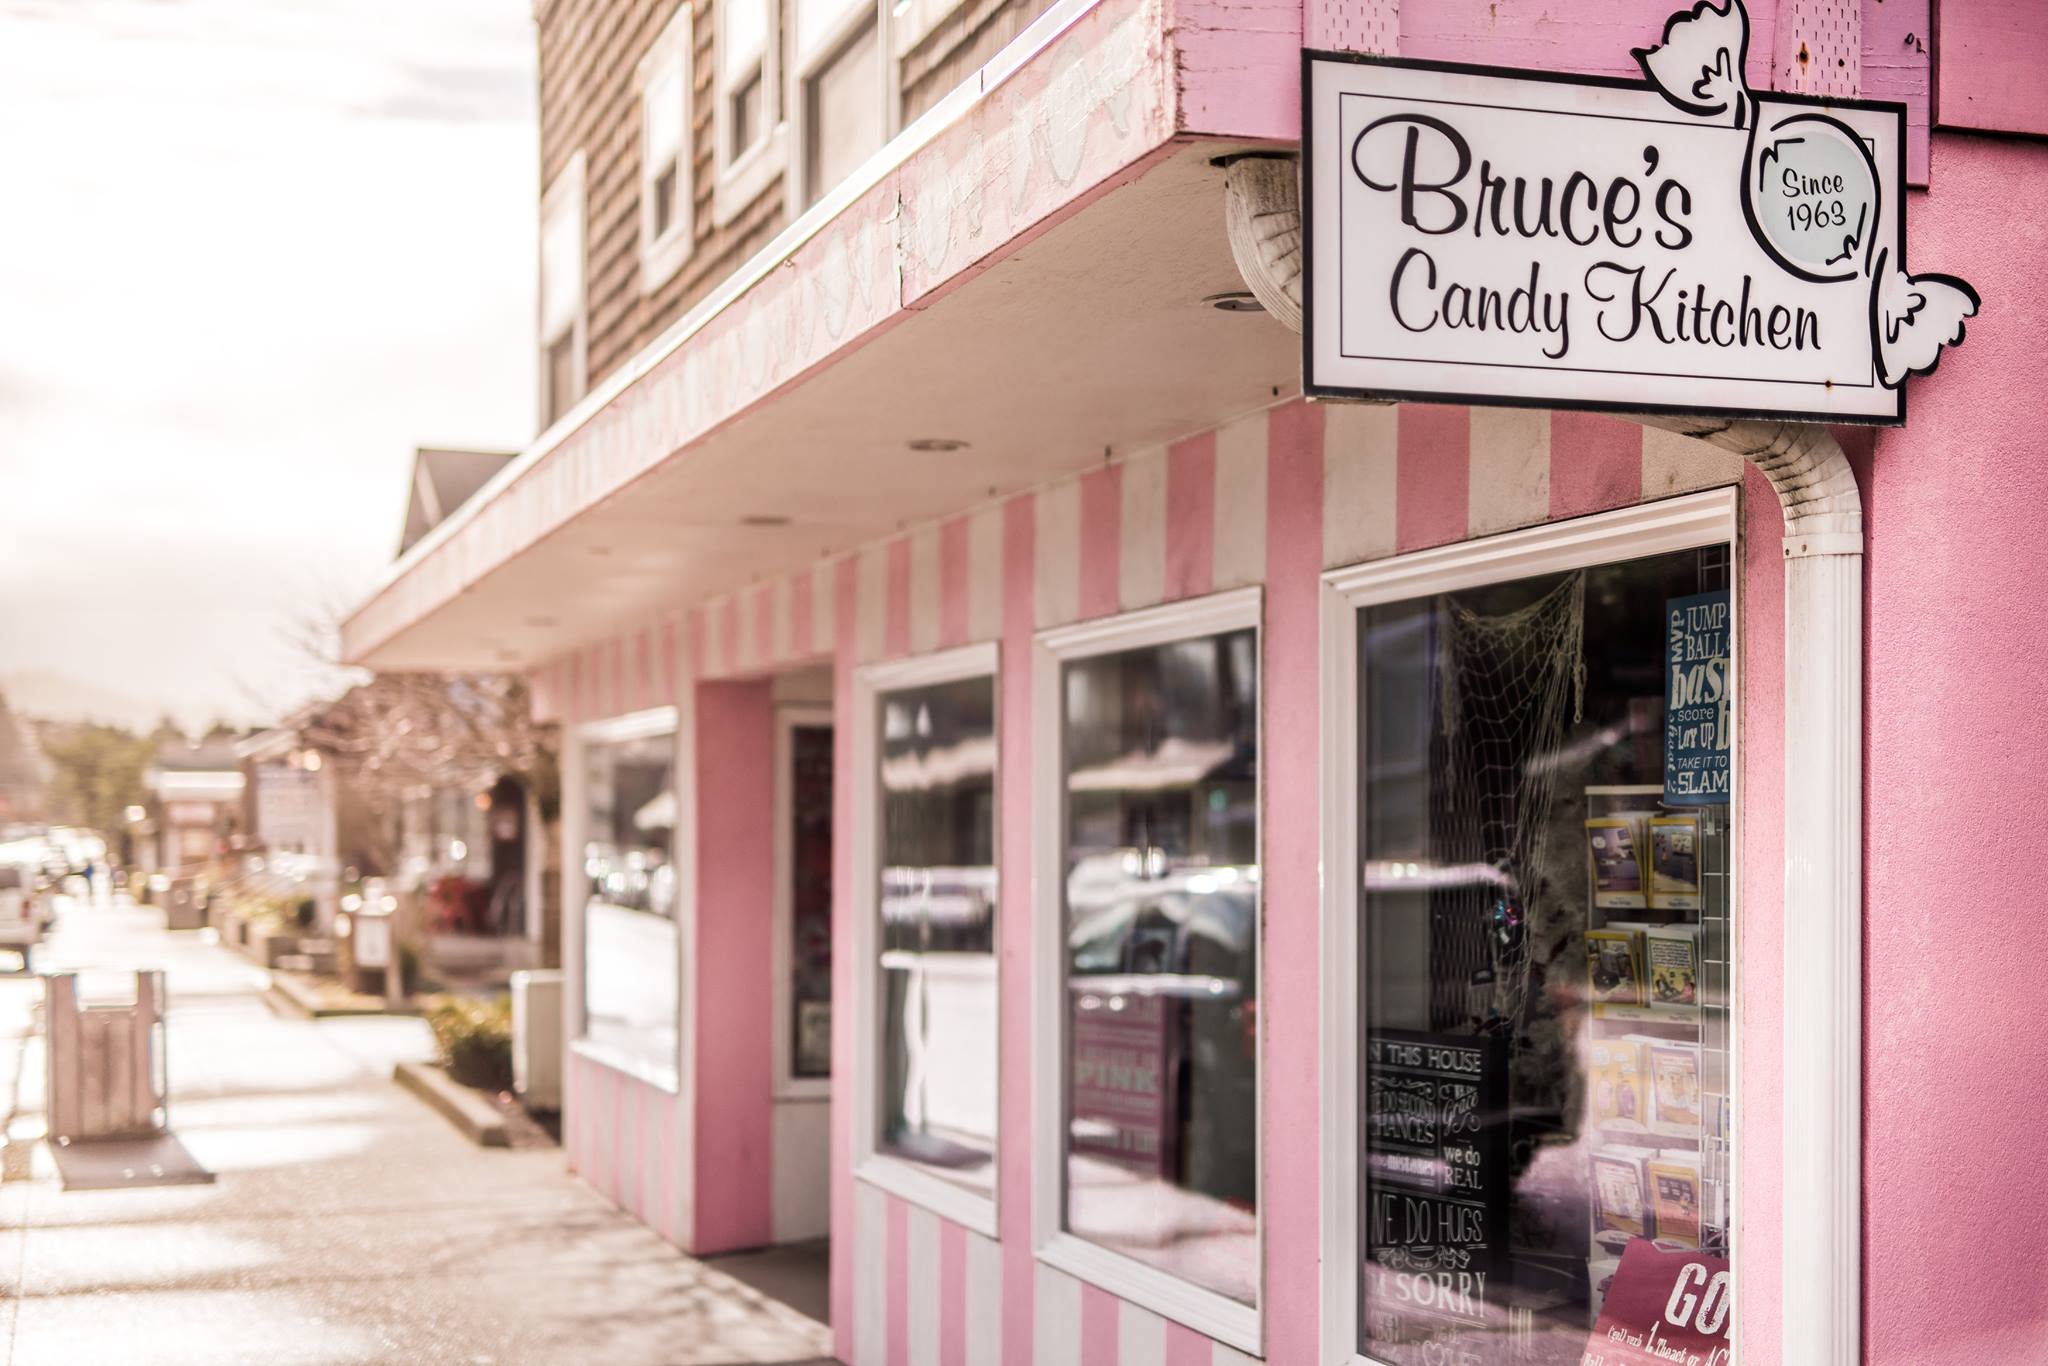 The pink and white striped exterior of Bruce's Candy Kitchen in Cannon Beach Oregon.